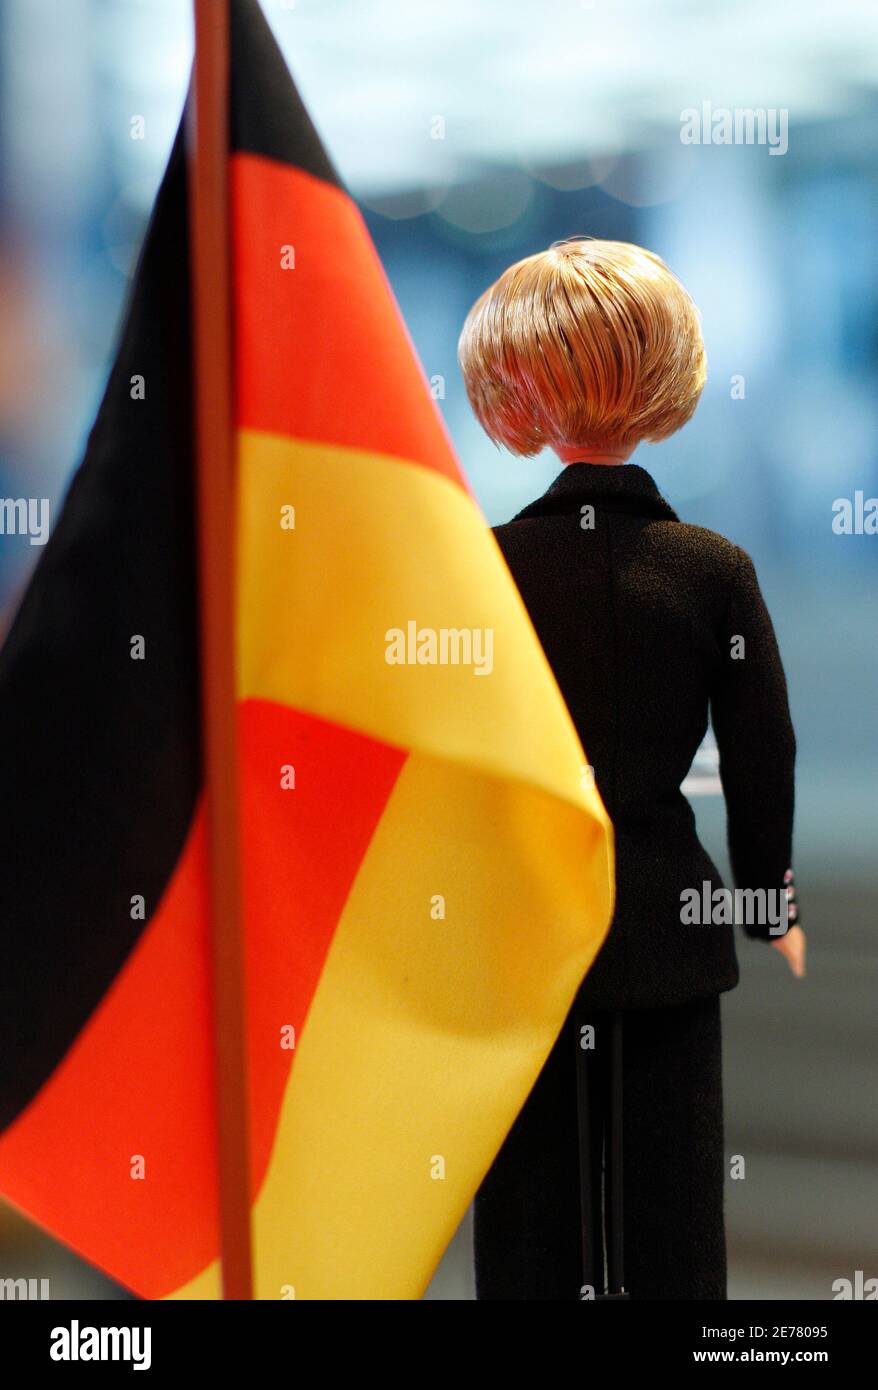 A German Chancellor Angela Merkel Barbie doll, is displayed during an event  at a department store in Hamburg March 9, 2009. Barbie has chosen to honour  and recognise Chancellor Merkel as a